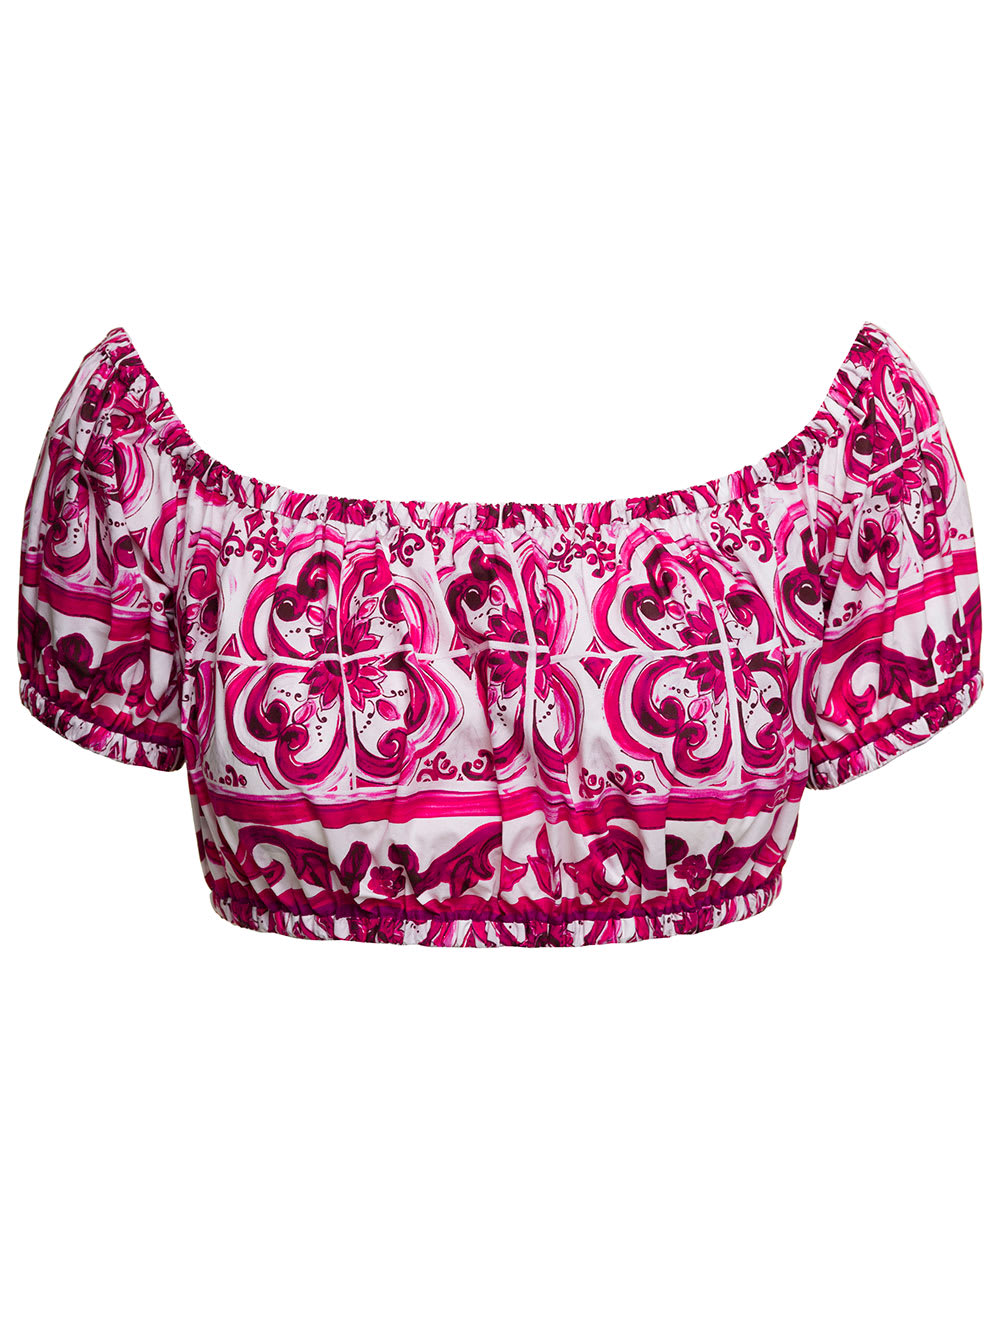 DOLCE & GABBANA FUCHSIA AND WHITE CROPPED TOP WITH BARDOT NECKLINE AND MAJOLICA PRINT IN COTTON WOMAN